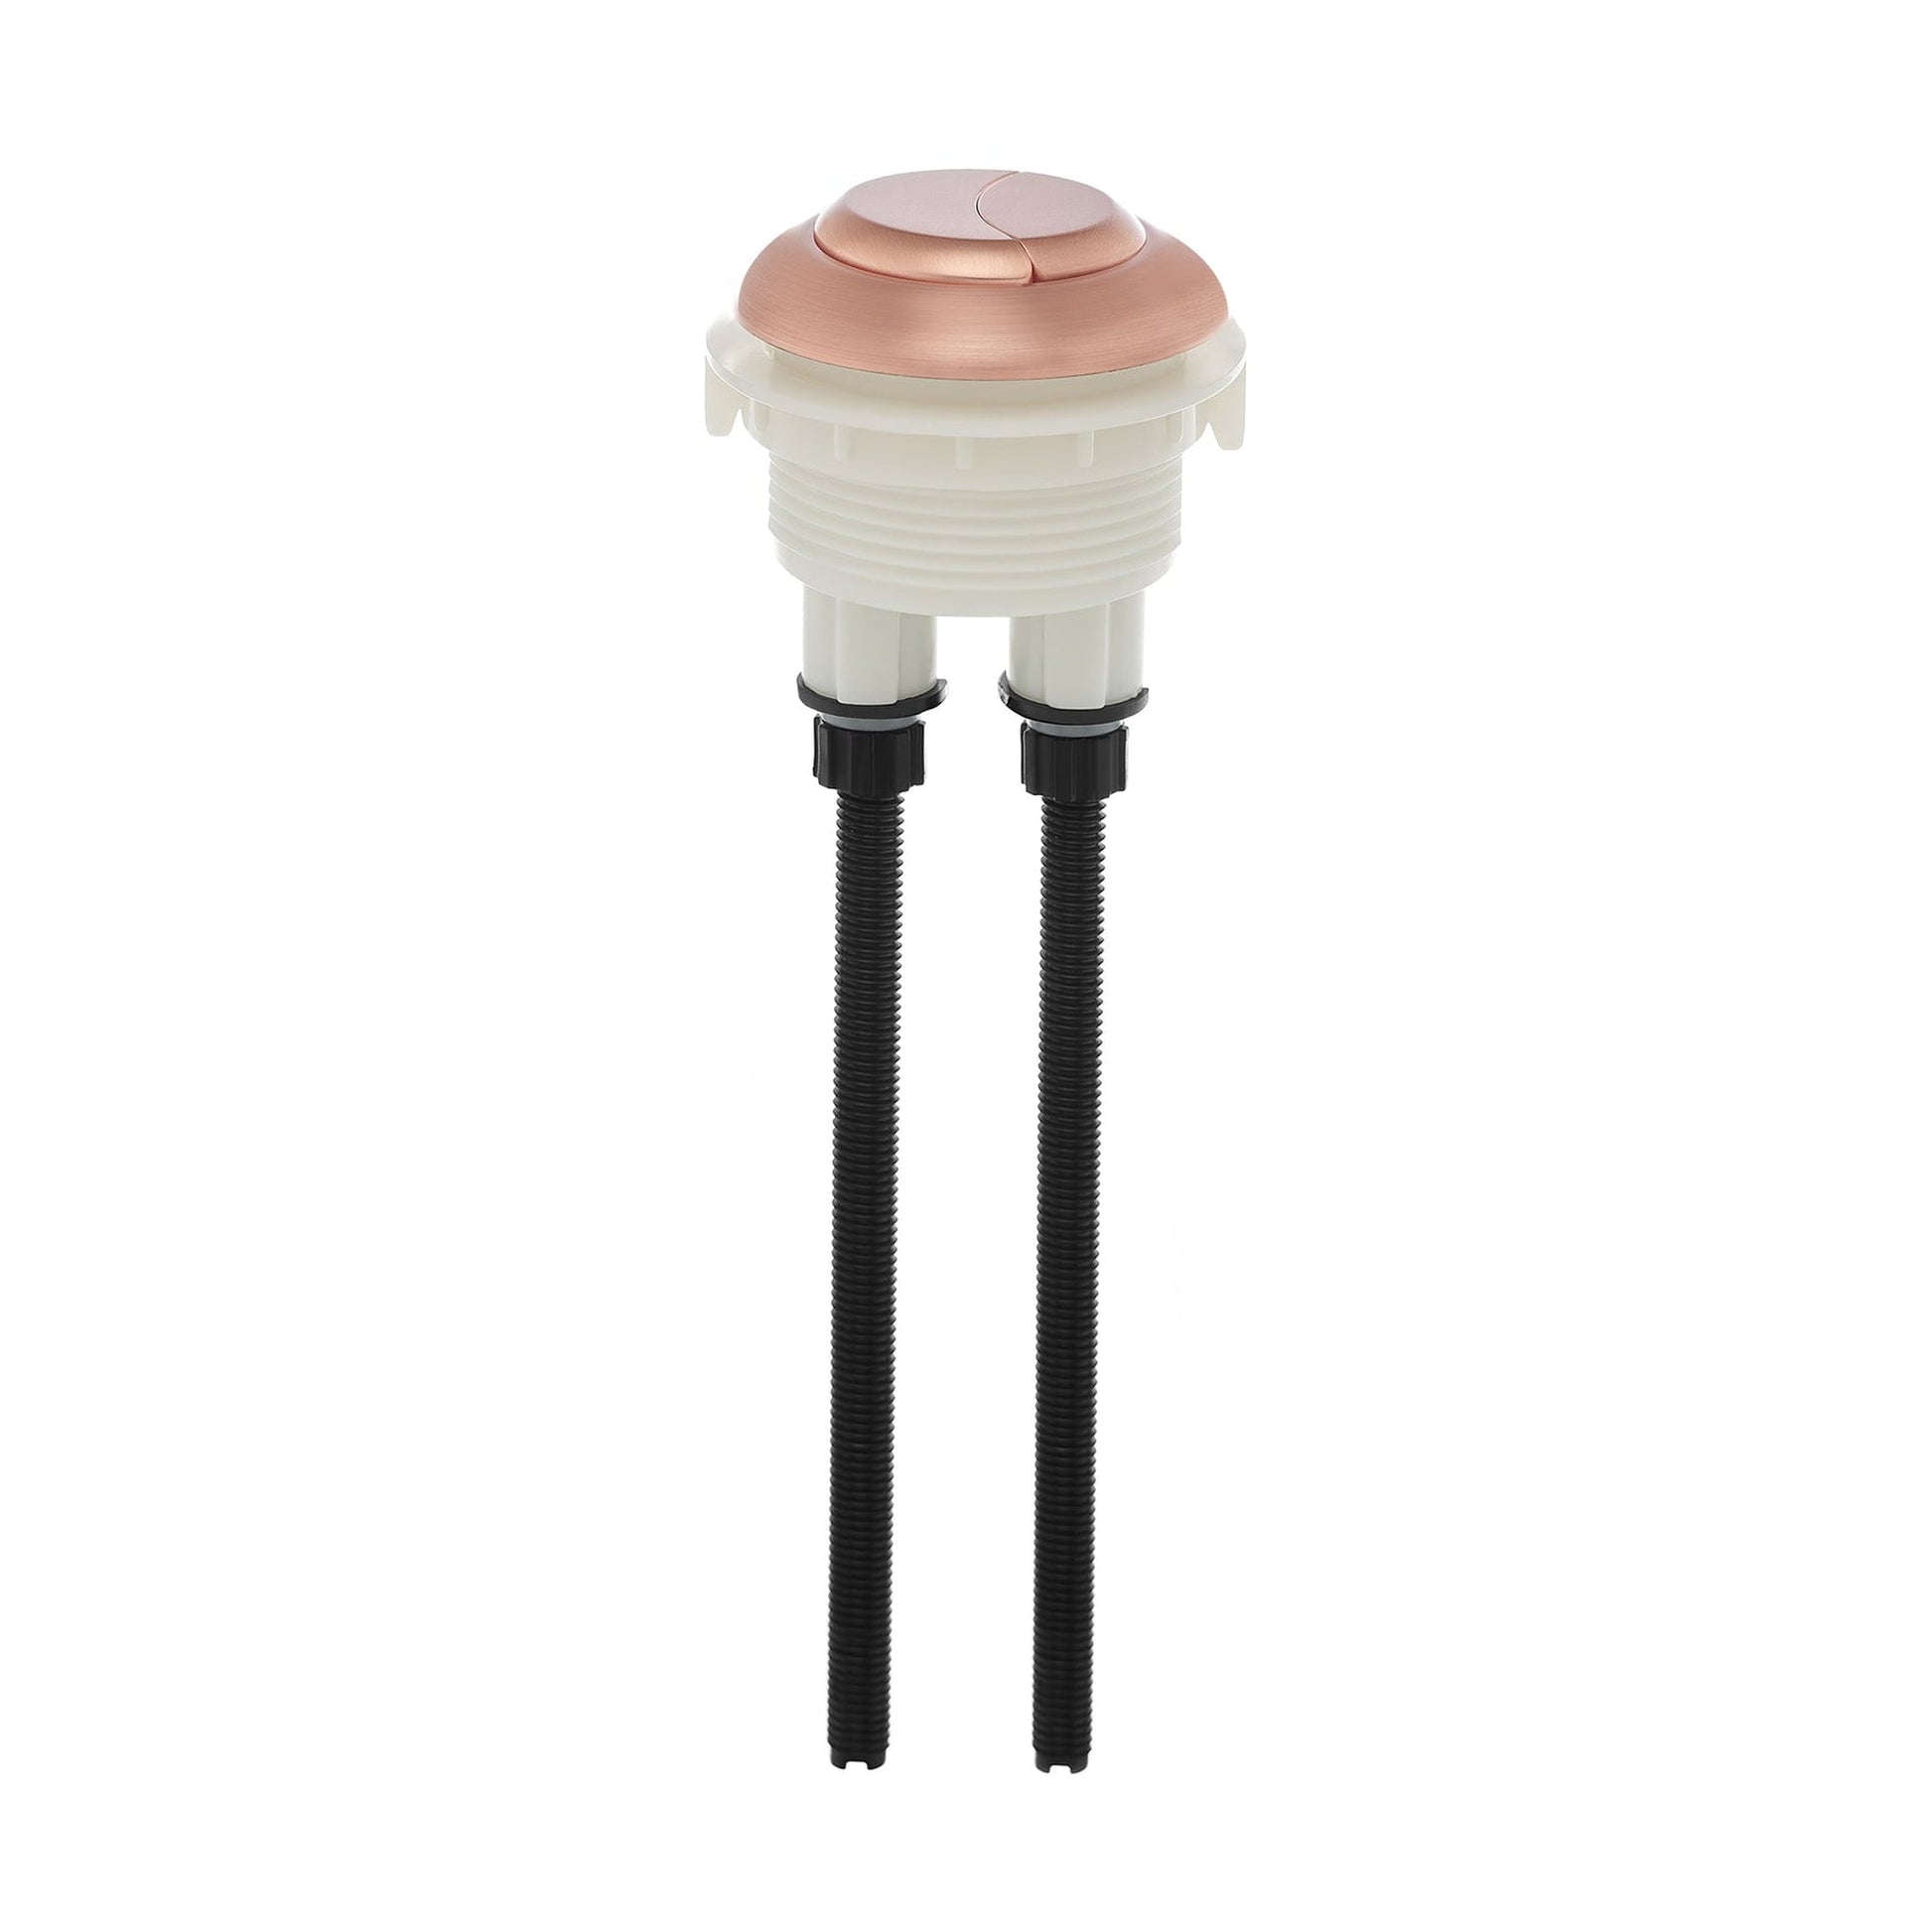 Swiss Madison Round Rose Gold Toilet Push Buttons With QQ Feet For SM-1T112